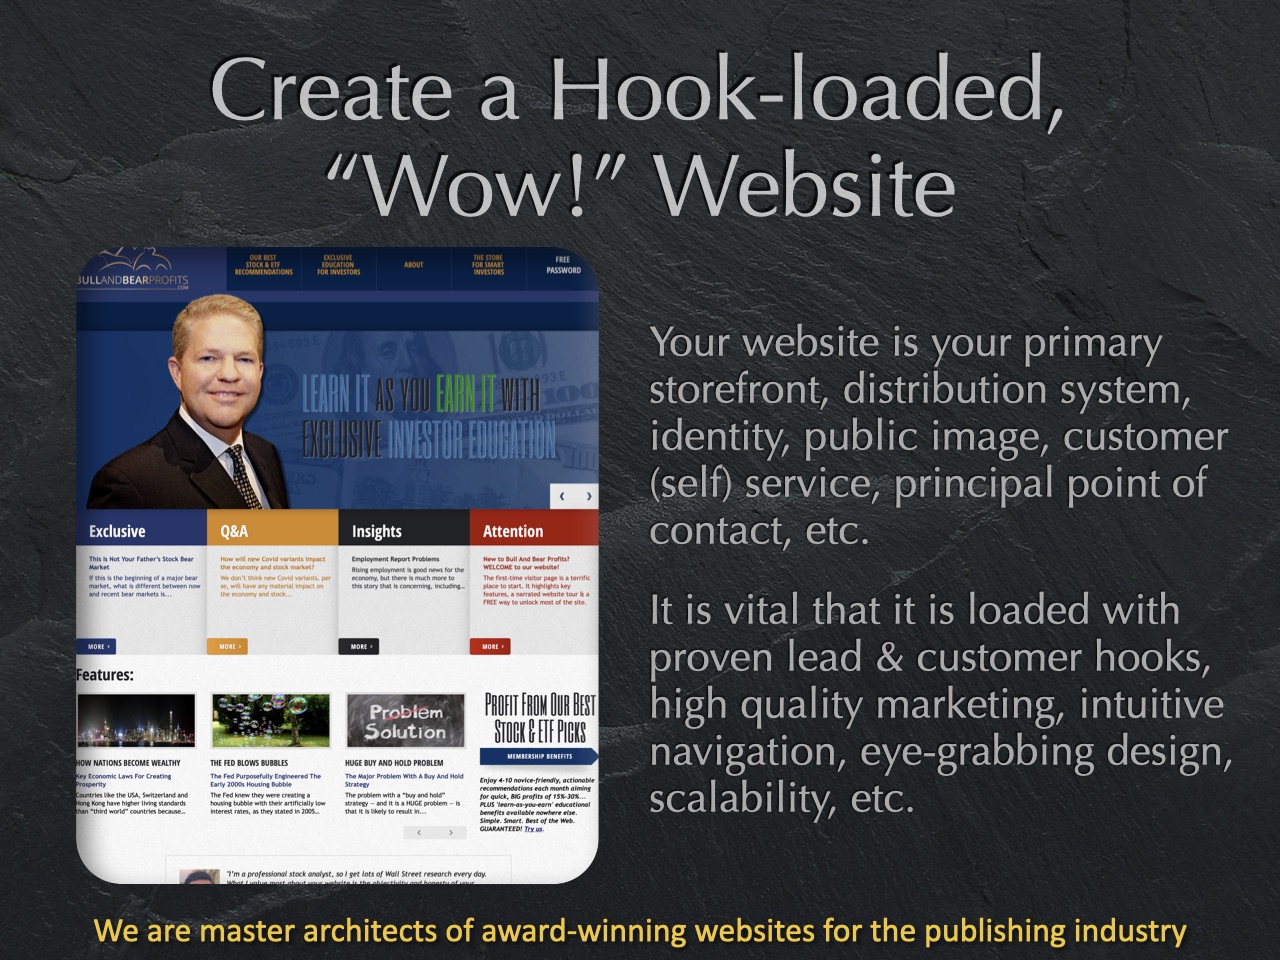 Create a website with many lead hooks. Build in migration from investing prospect to lead to paying subscriber